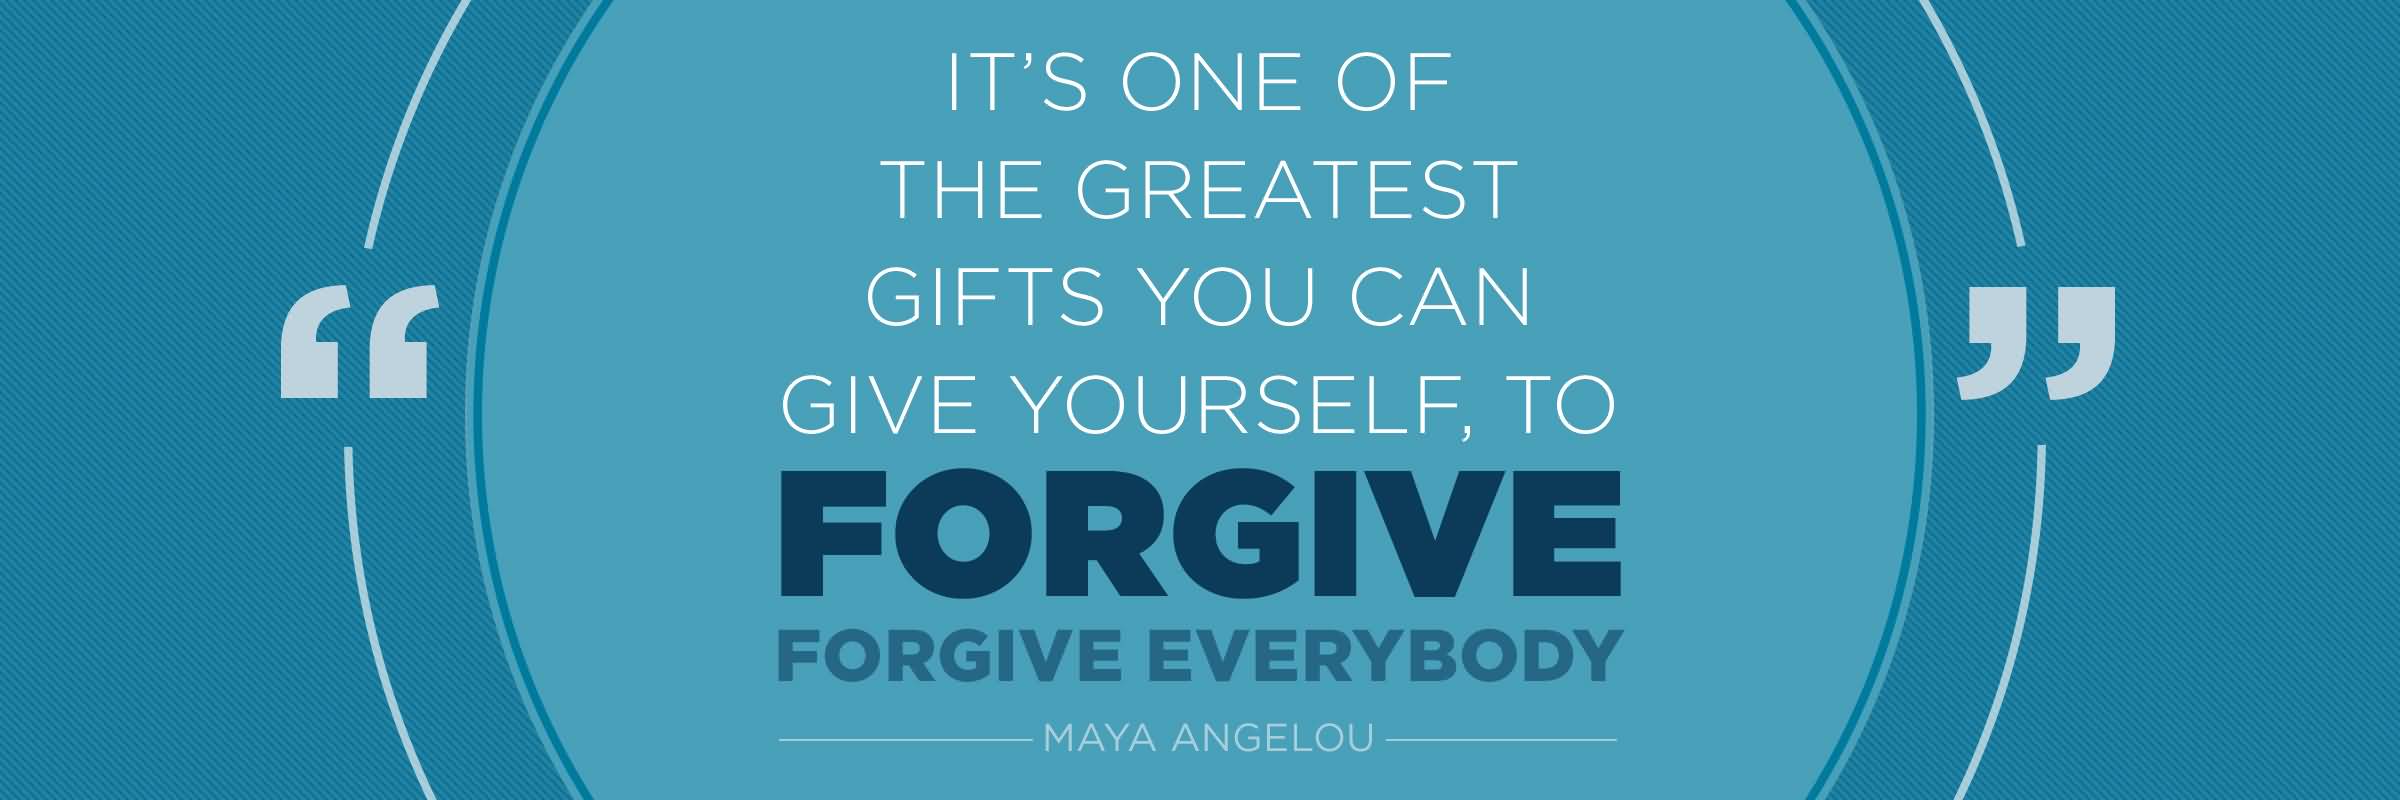 It's One Of The Greatest Gifts You Can Give Yourself To Forgive